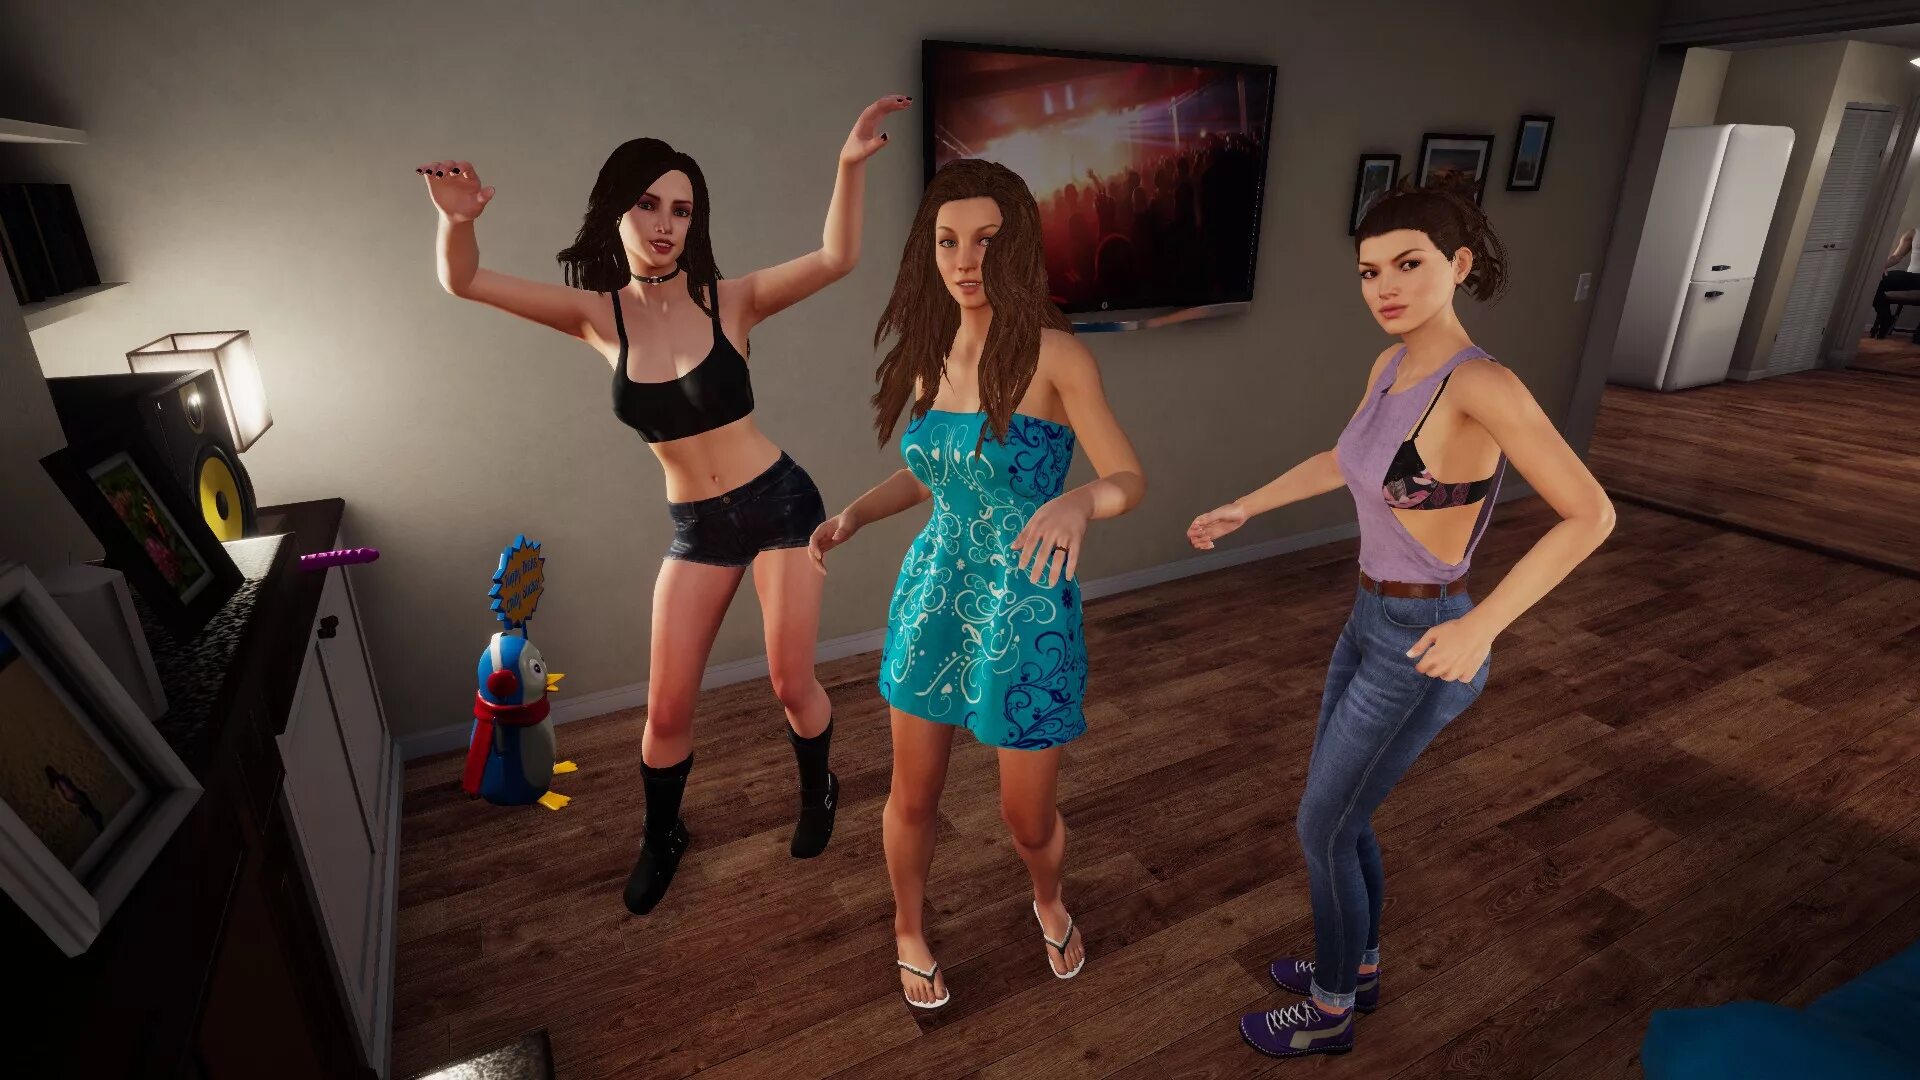 House Party игра. House Party игра Мэдисон. House.Party.Frank.early.access. House Party Эми. Игры 18